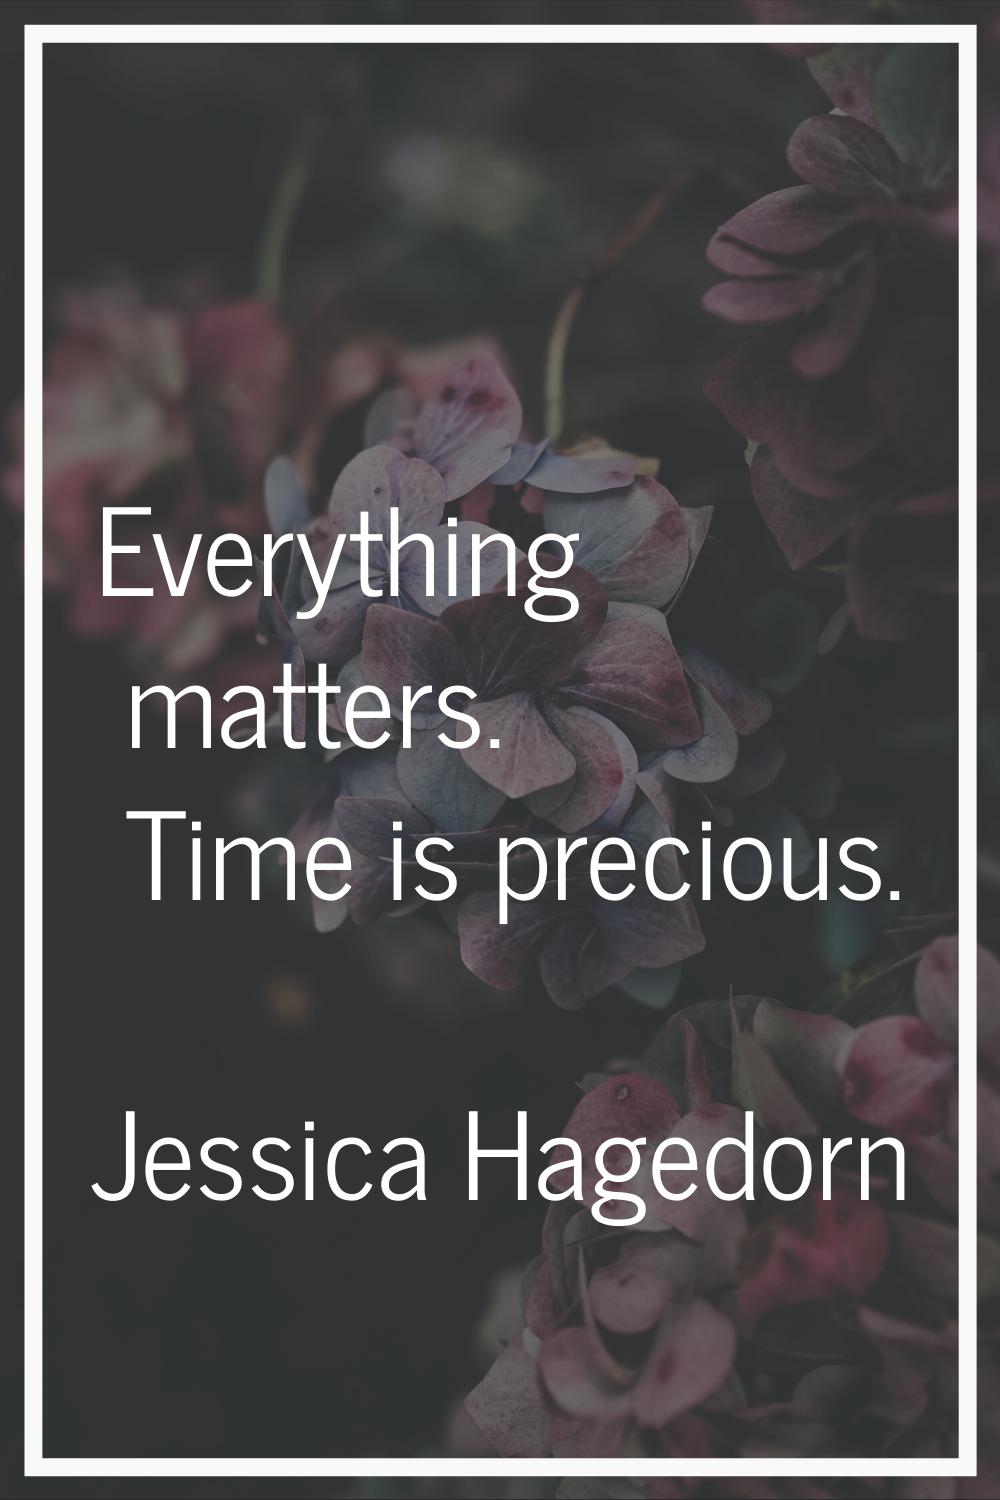 Everything matters. Time is precious.